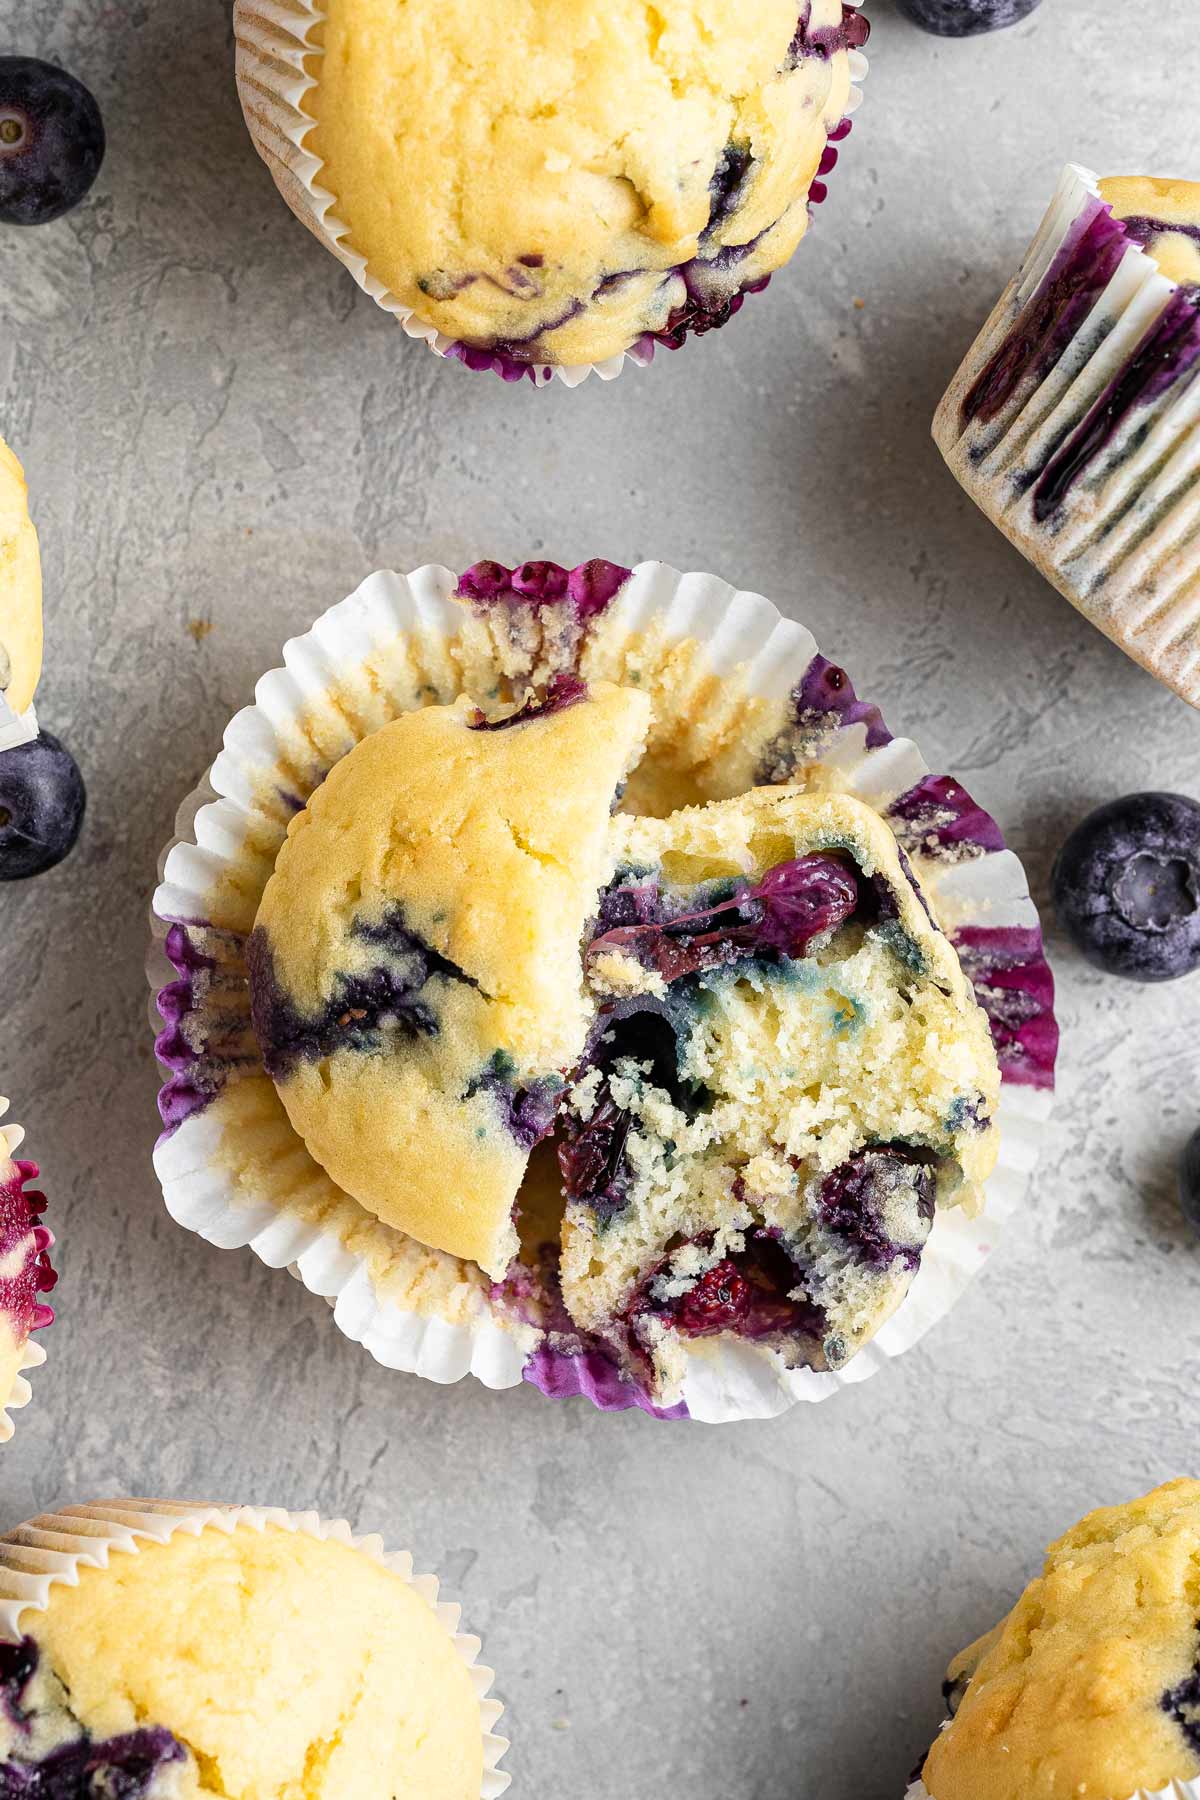 muffin cut open to show the fluffy texture and blueberries inside